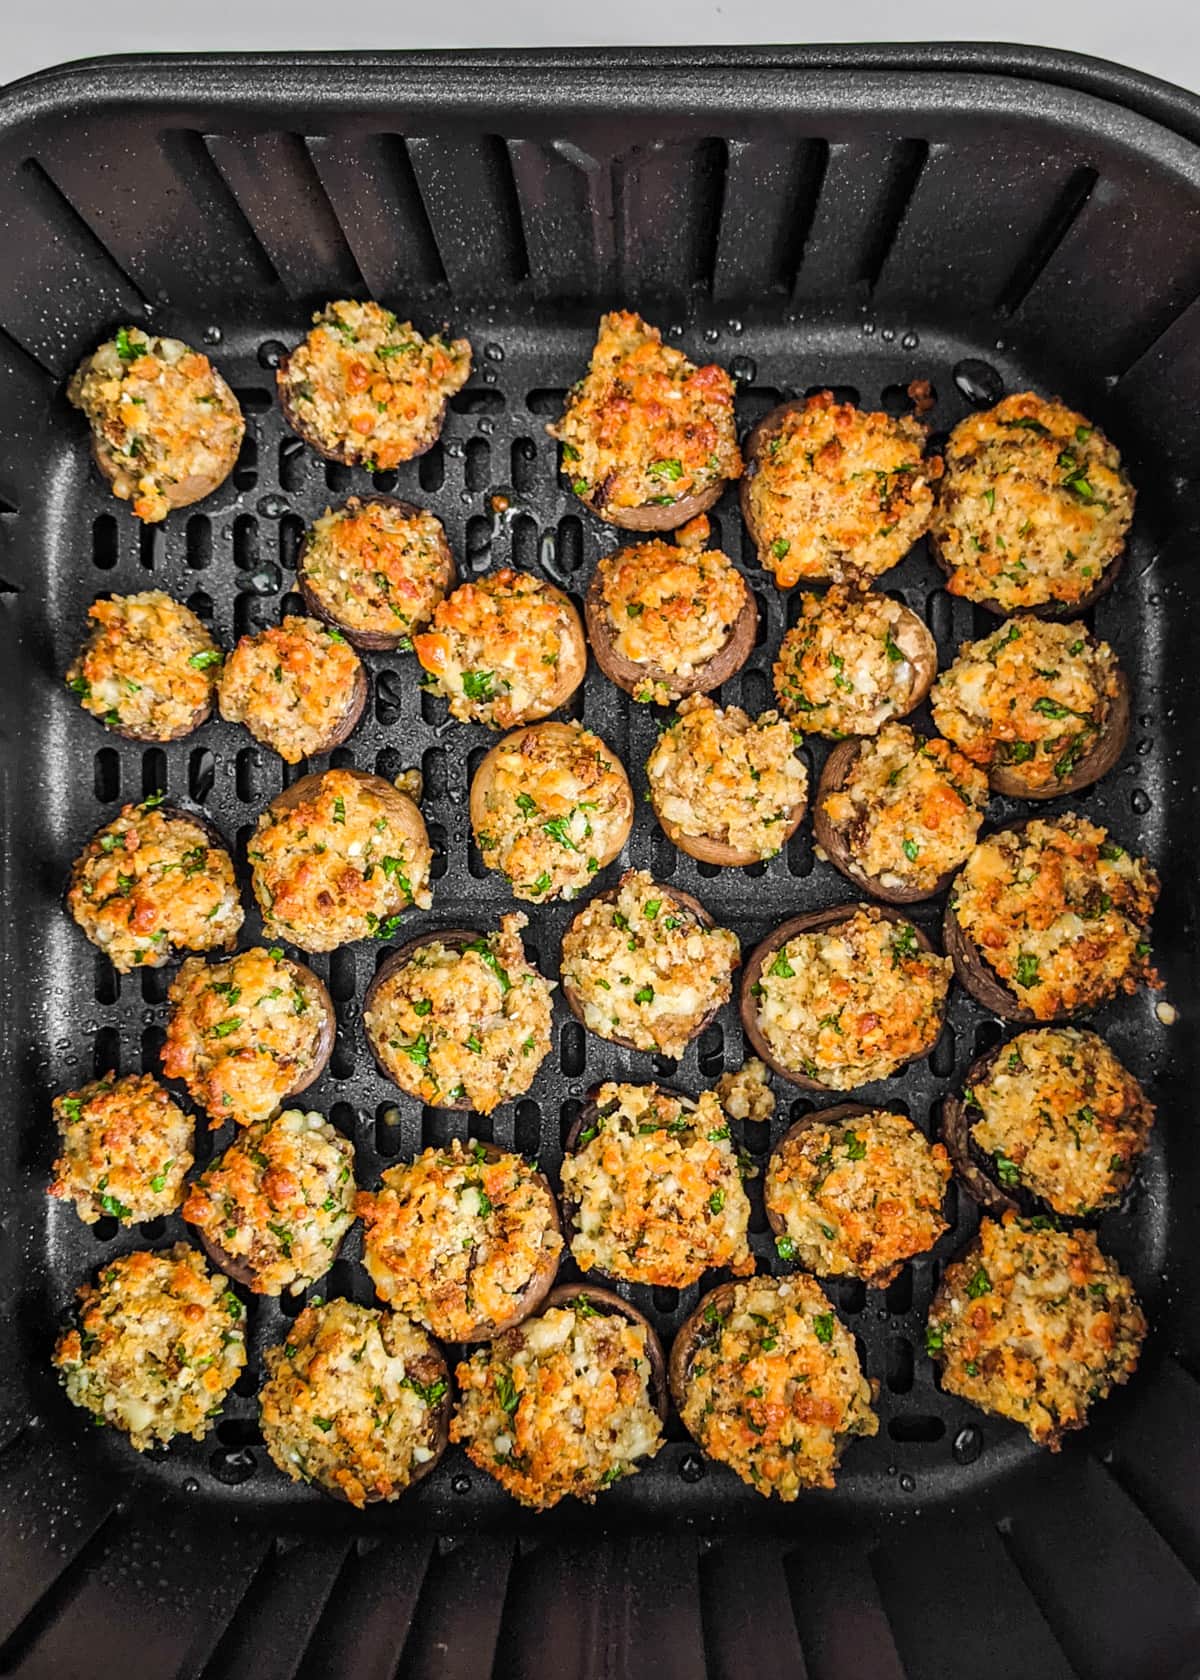 Air fryer basket with cooked stuffed mushrooms.